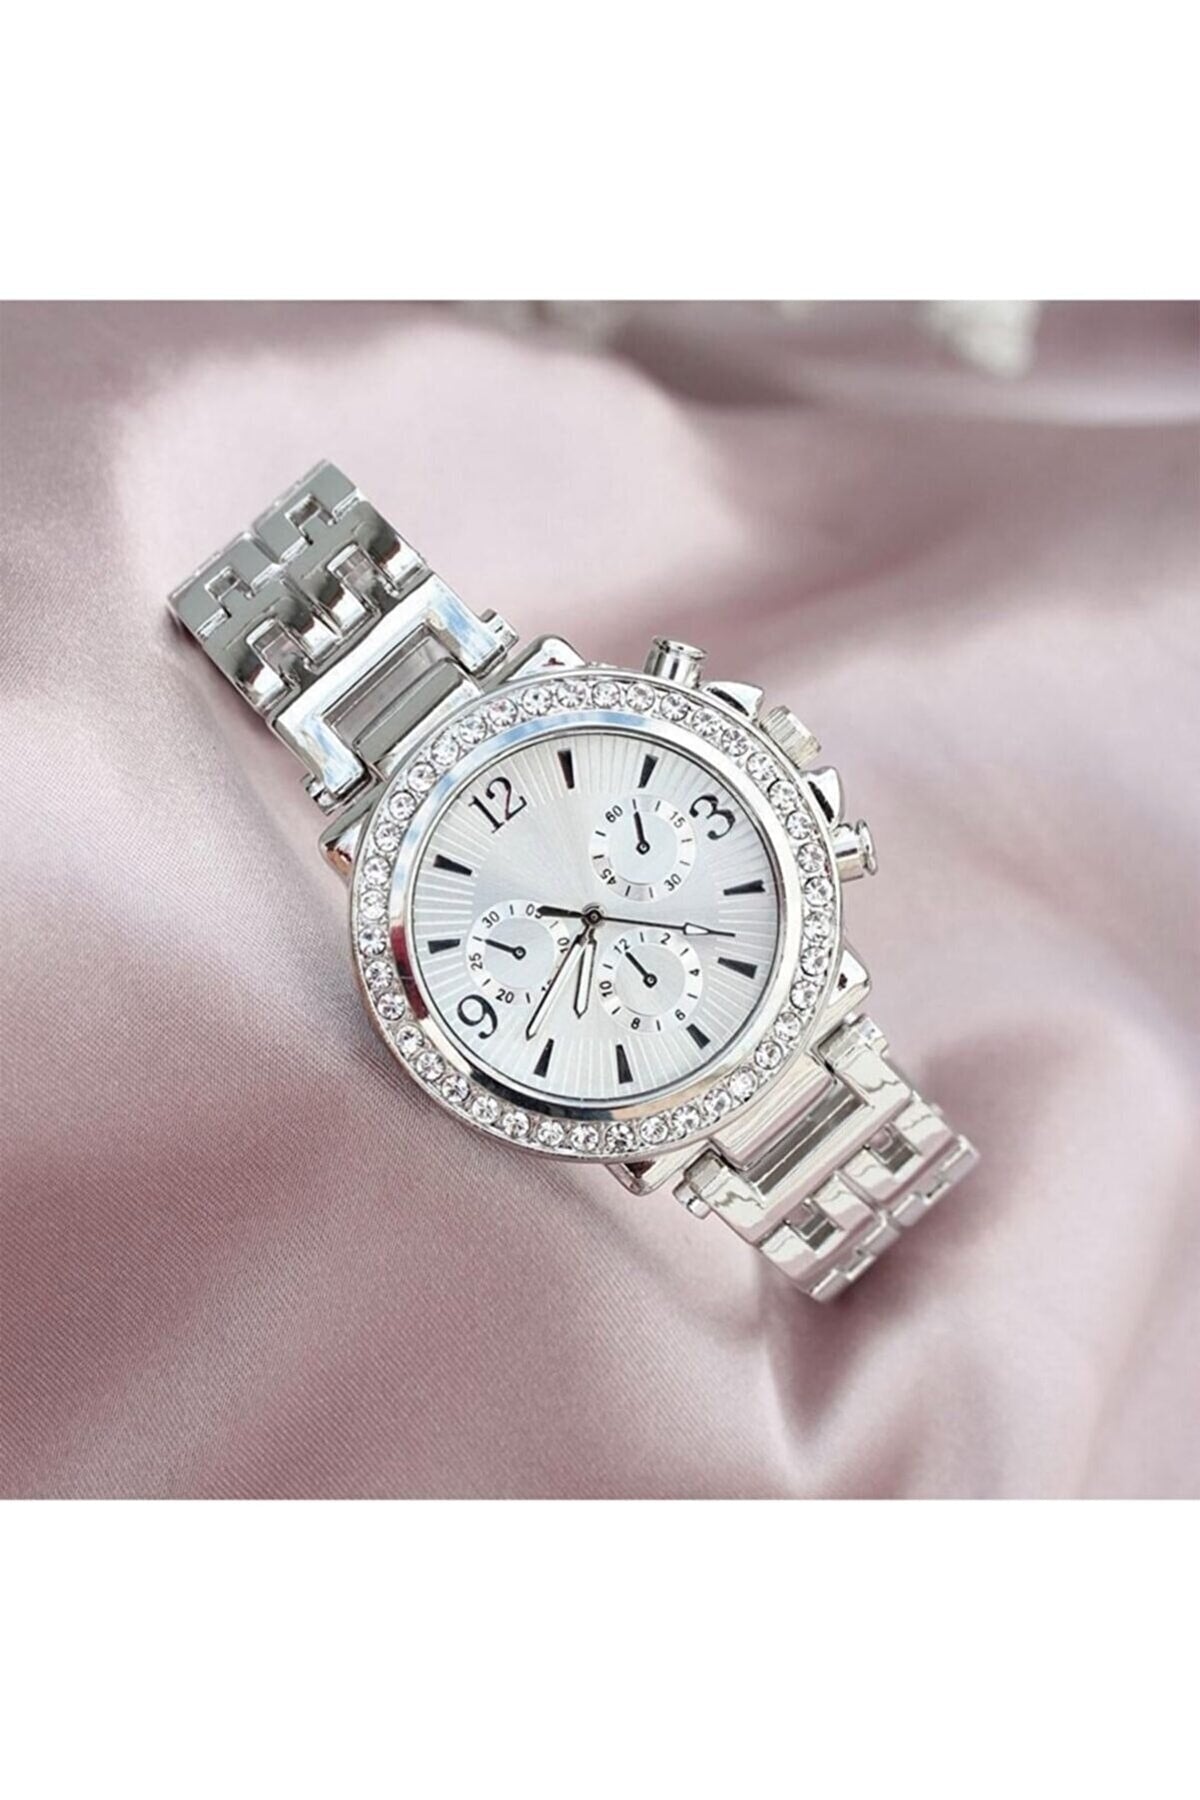 Steel Women's Wristwatch Young Girl's Watches